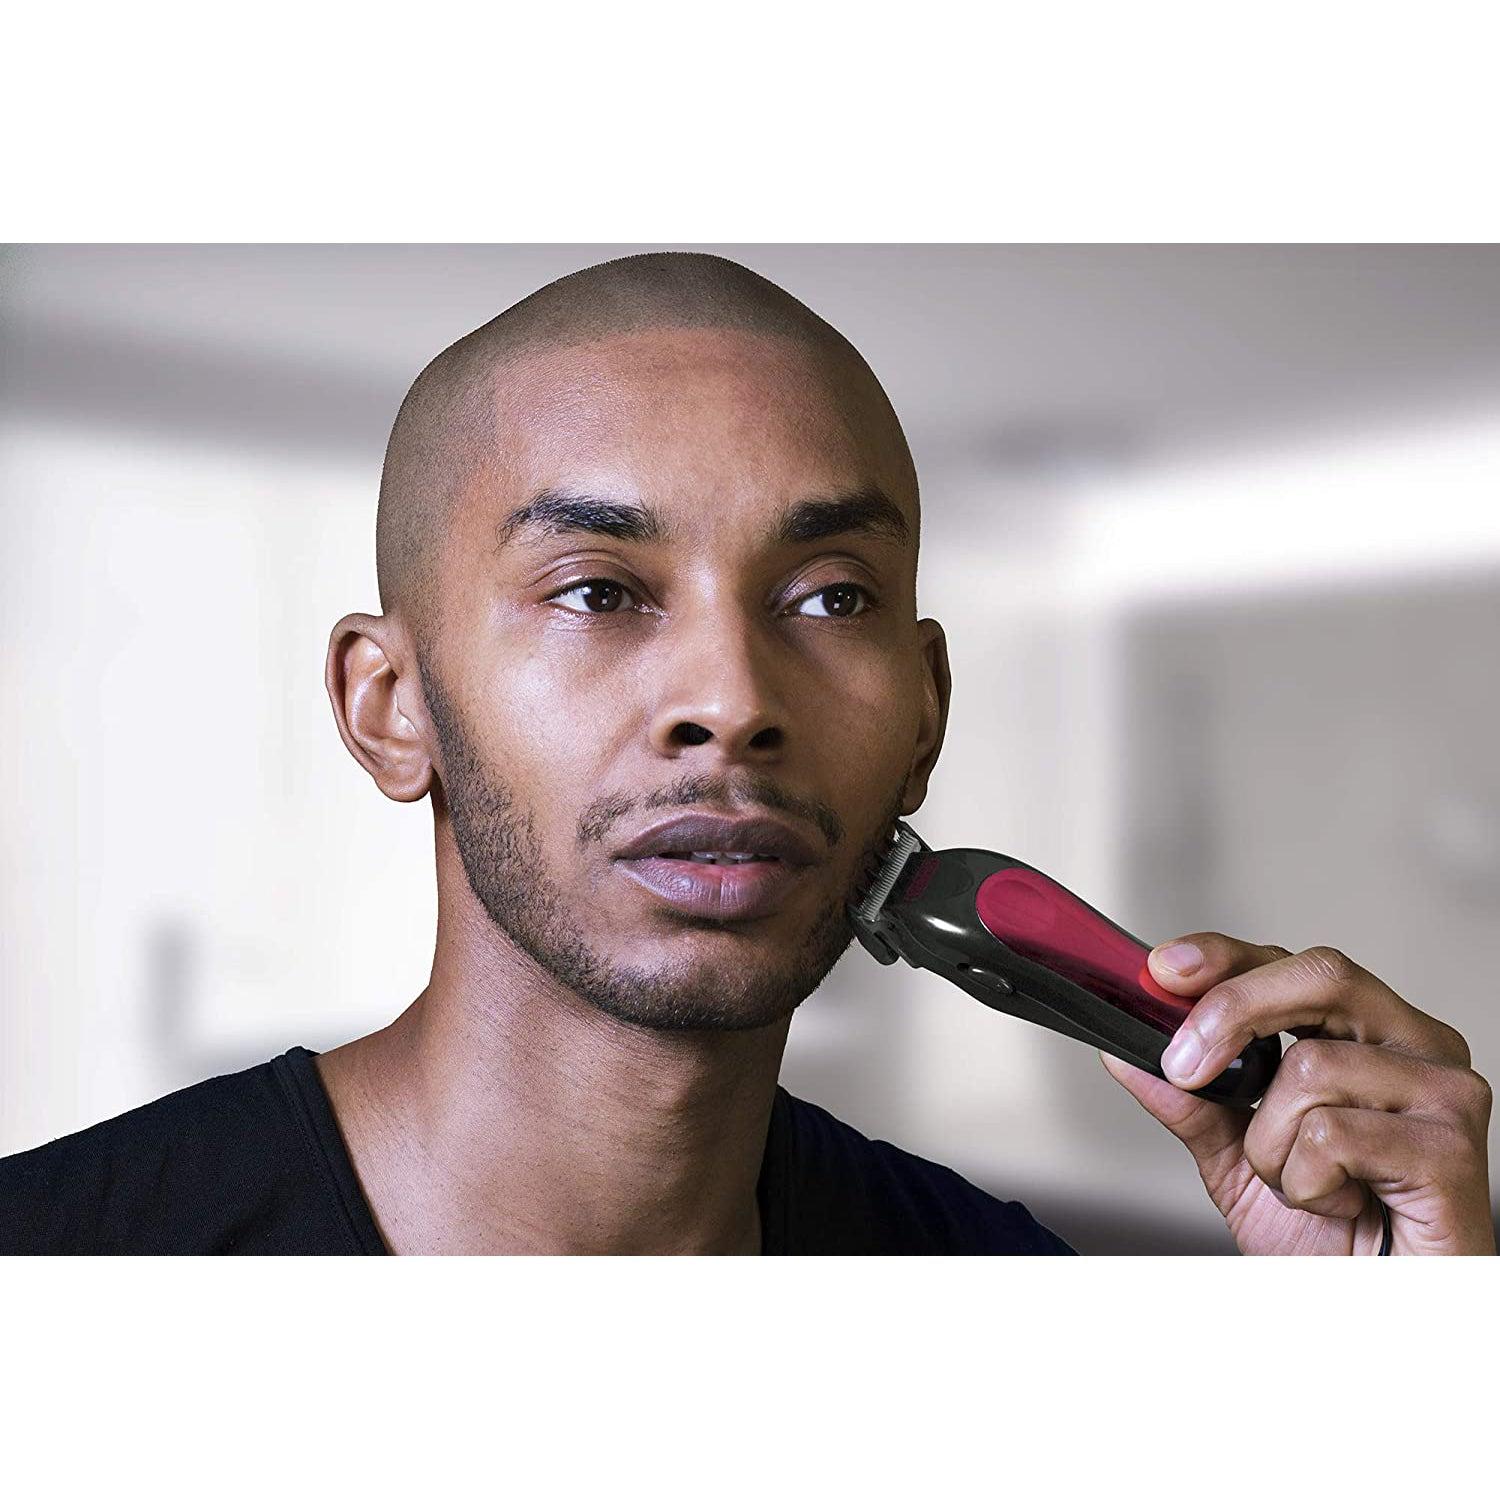 Wahl Shaver Beard Trimmer Men, T Pro Corded Afro Hair Trimmers for Men, Stubble Trimmer, Male Grooming Set - Healthxpress.ie